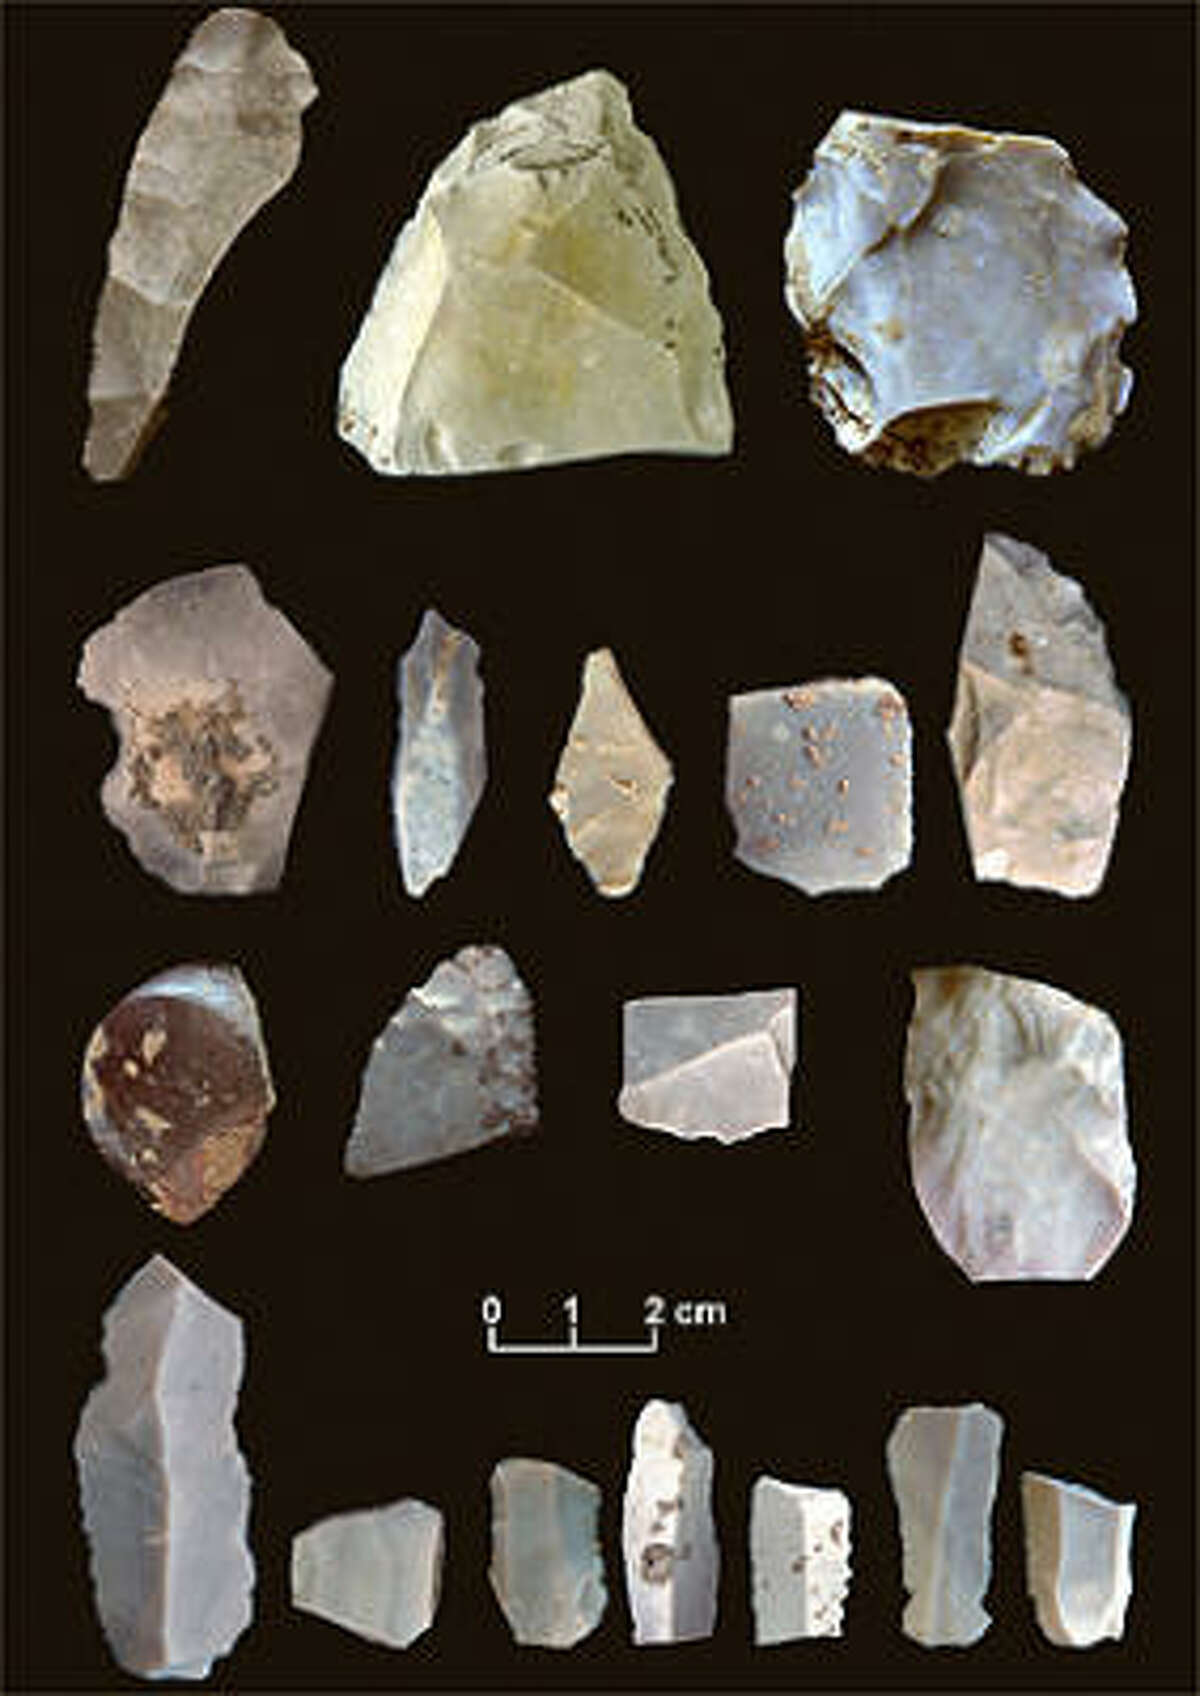 Some of the artifacts from the 15,500-year-old horizon.